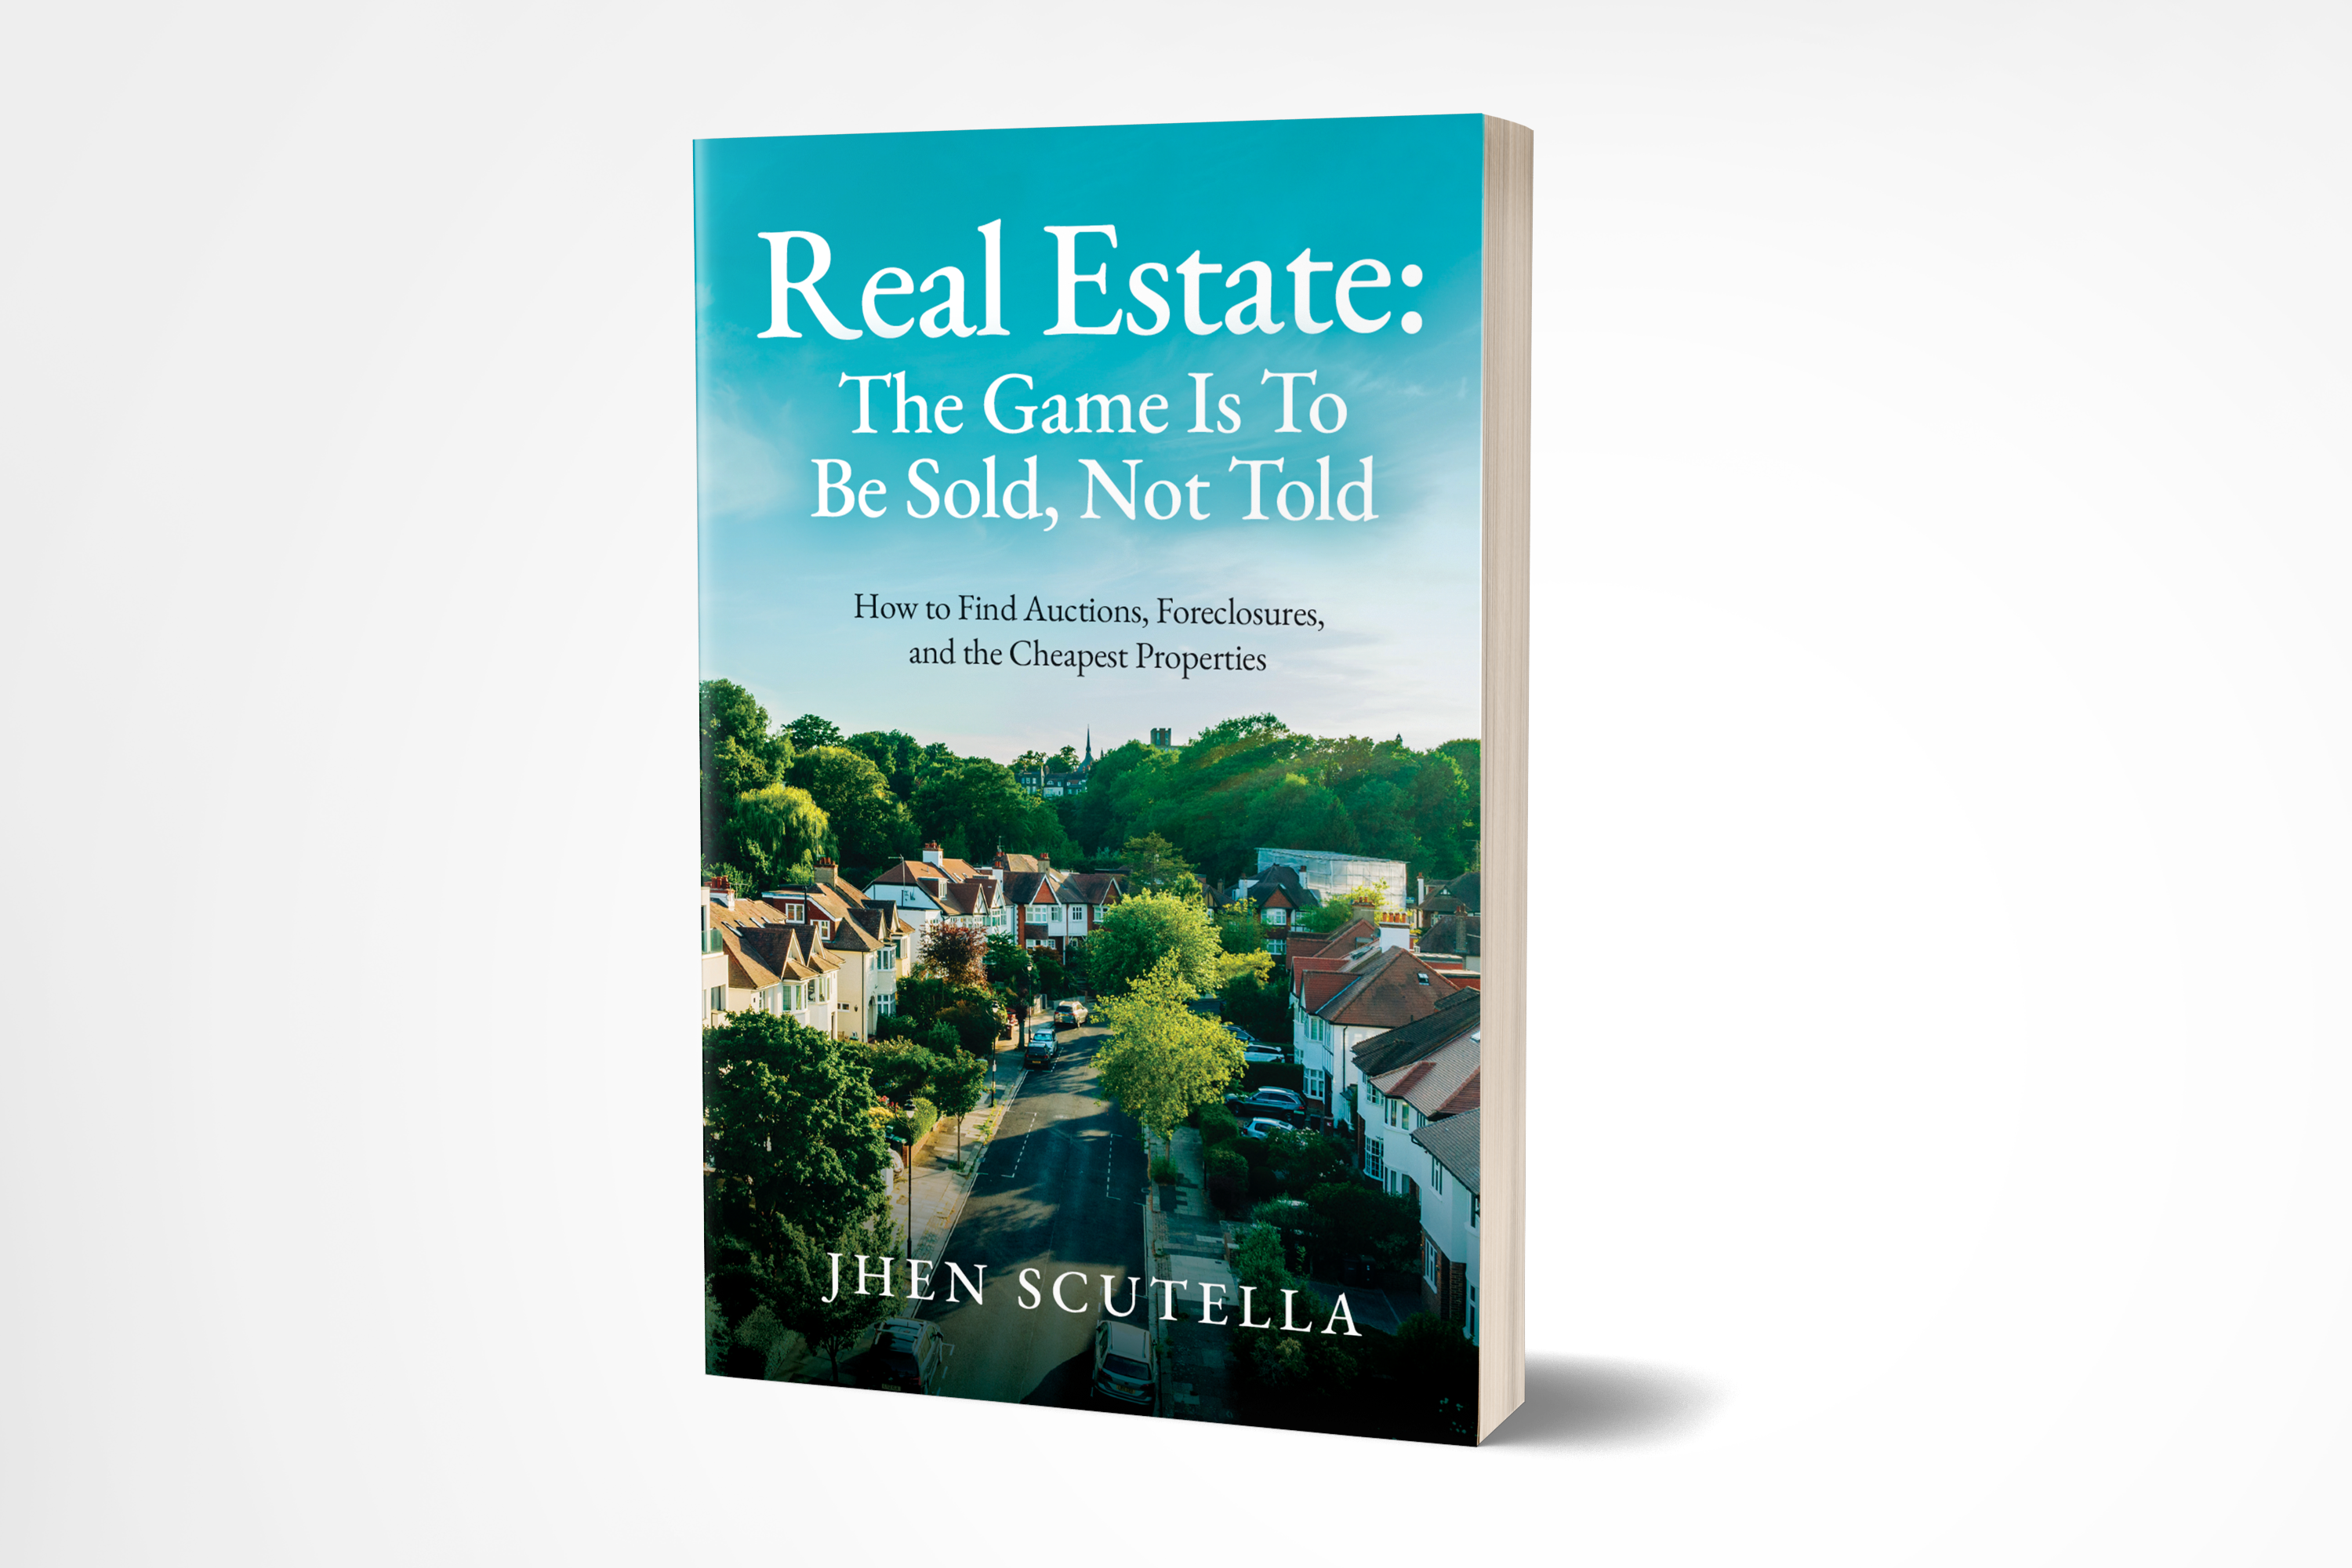 Real Estate: The Game Is To Be Sold, Not Told